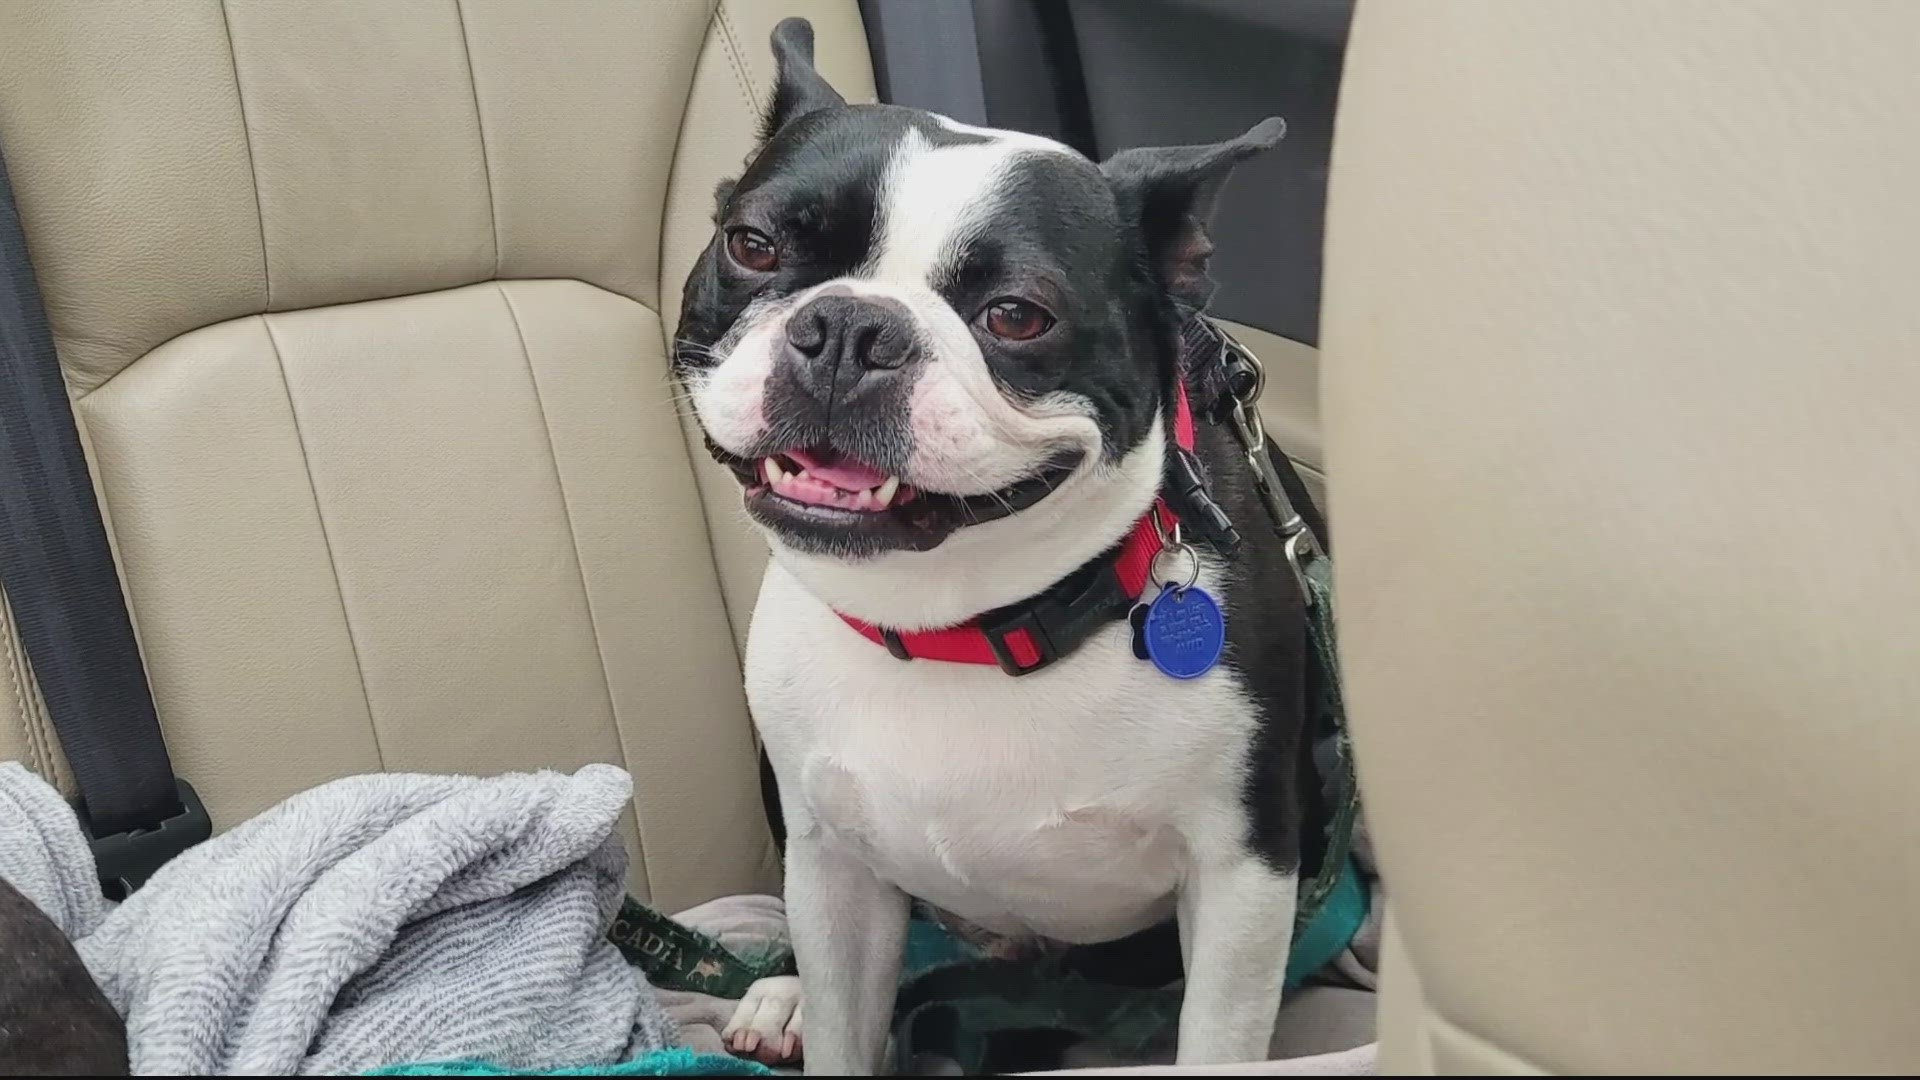 Police continue to search for a dog that was in the backseat of a car stolen from a Prince George's County gas station Thursday afternoon.